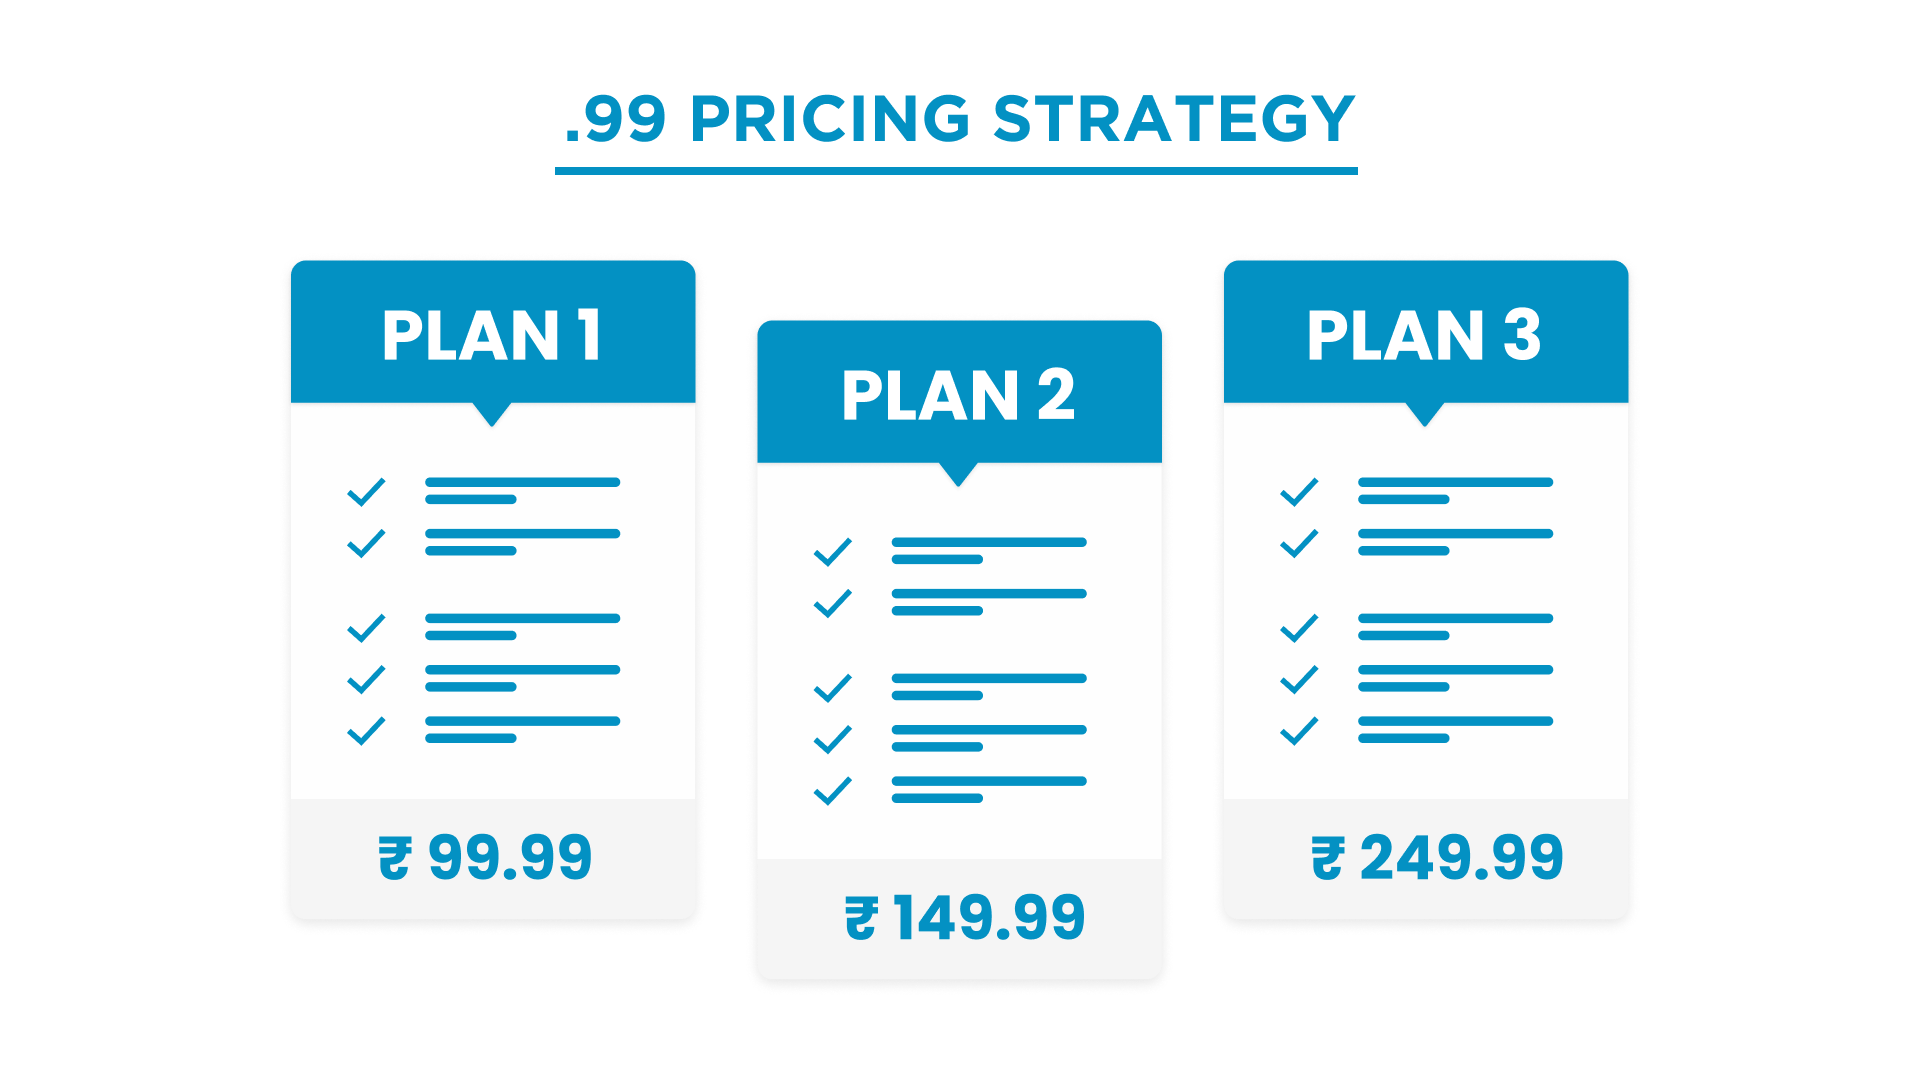 .99 pricing strategy